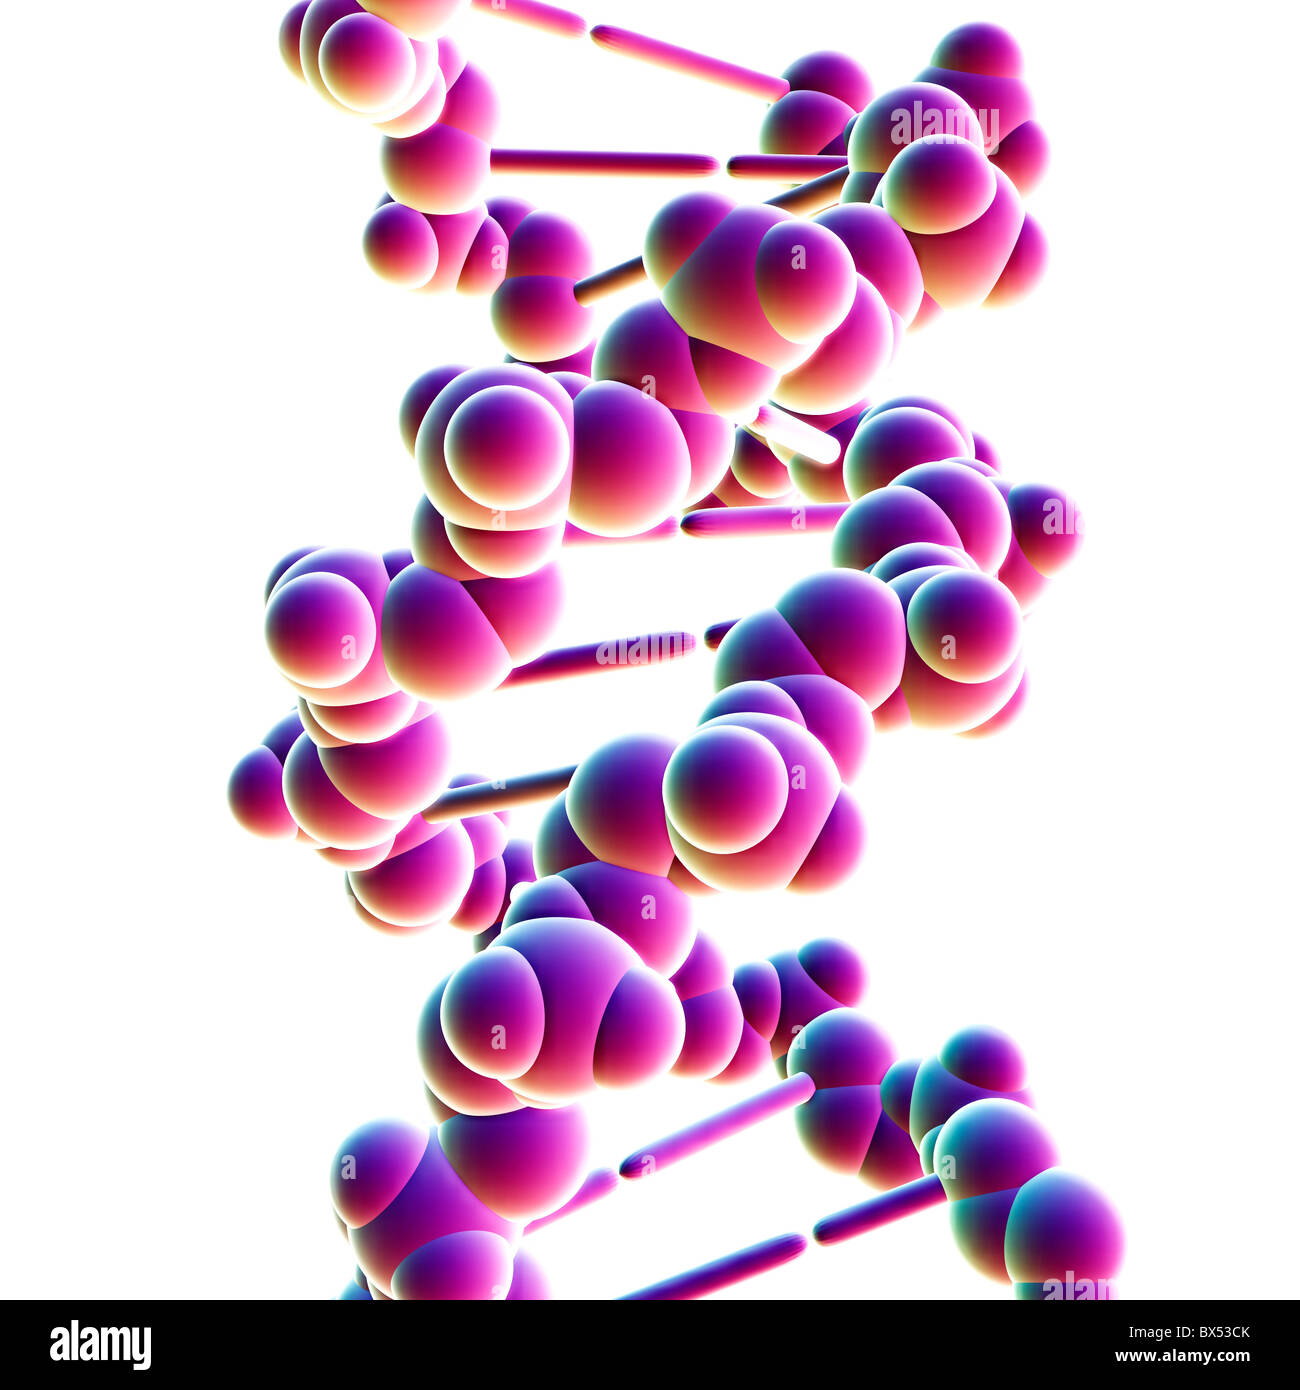 DNA structure Stock Photo